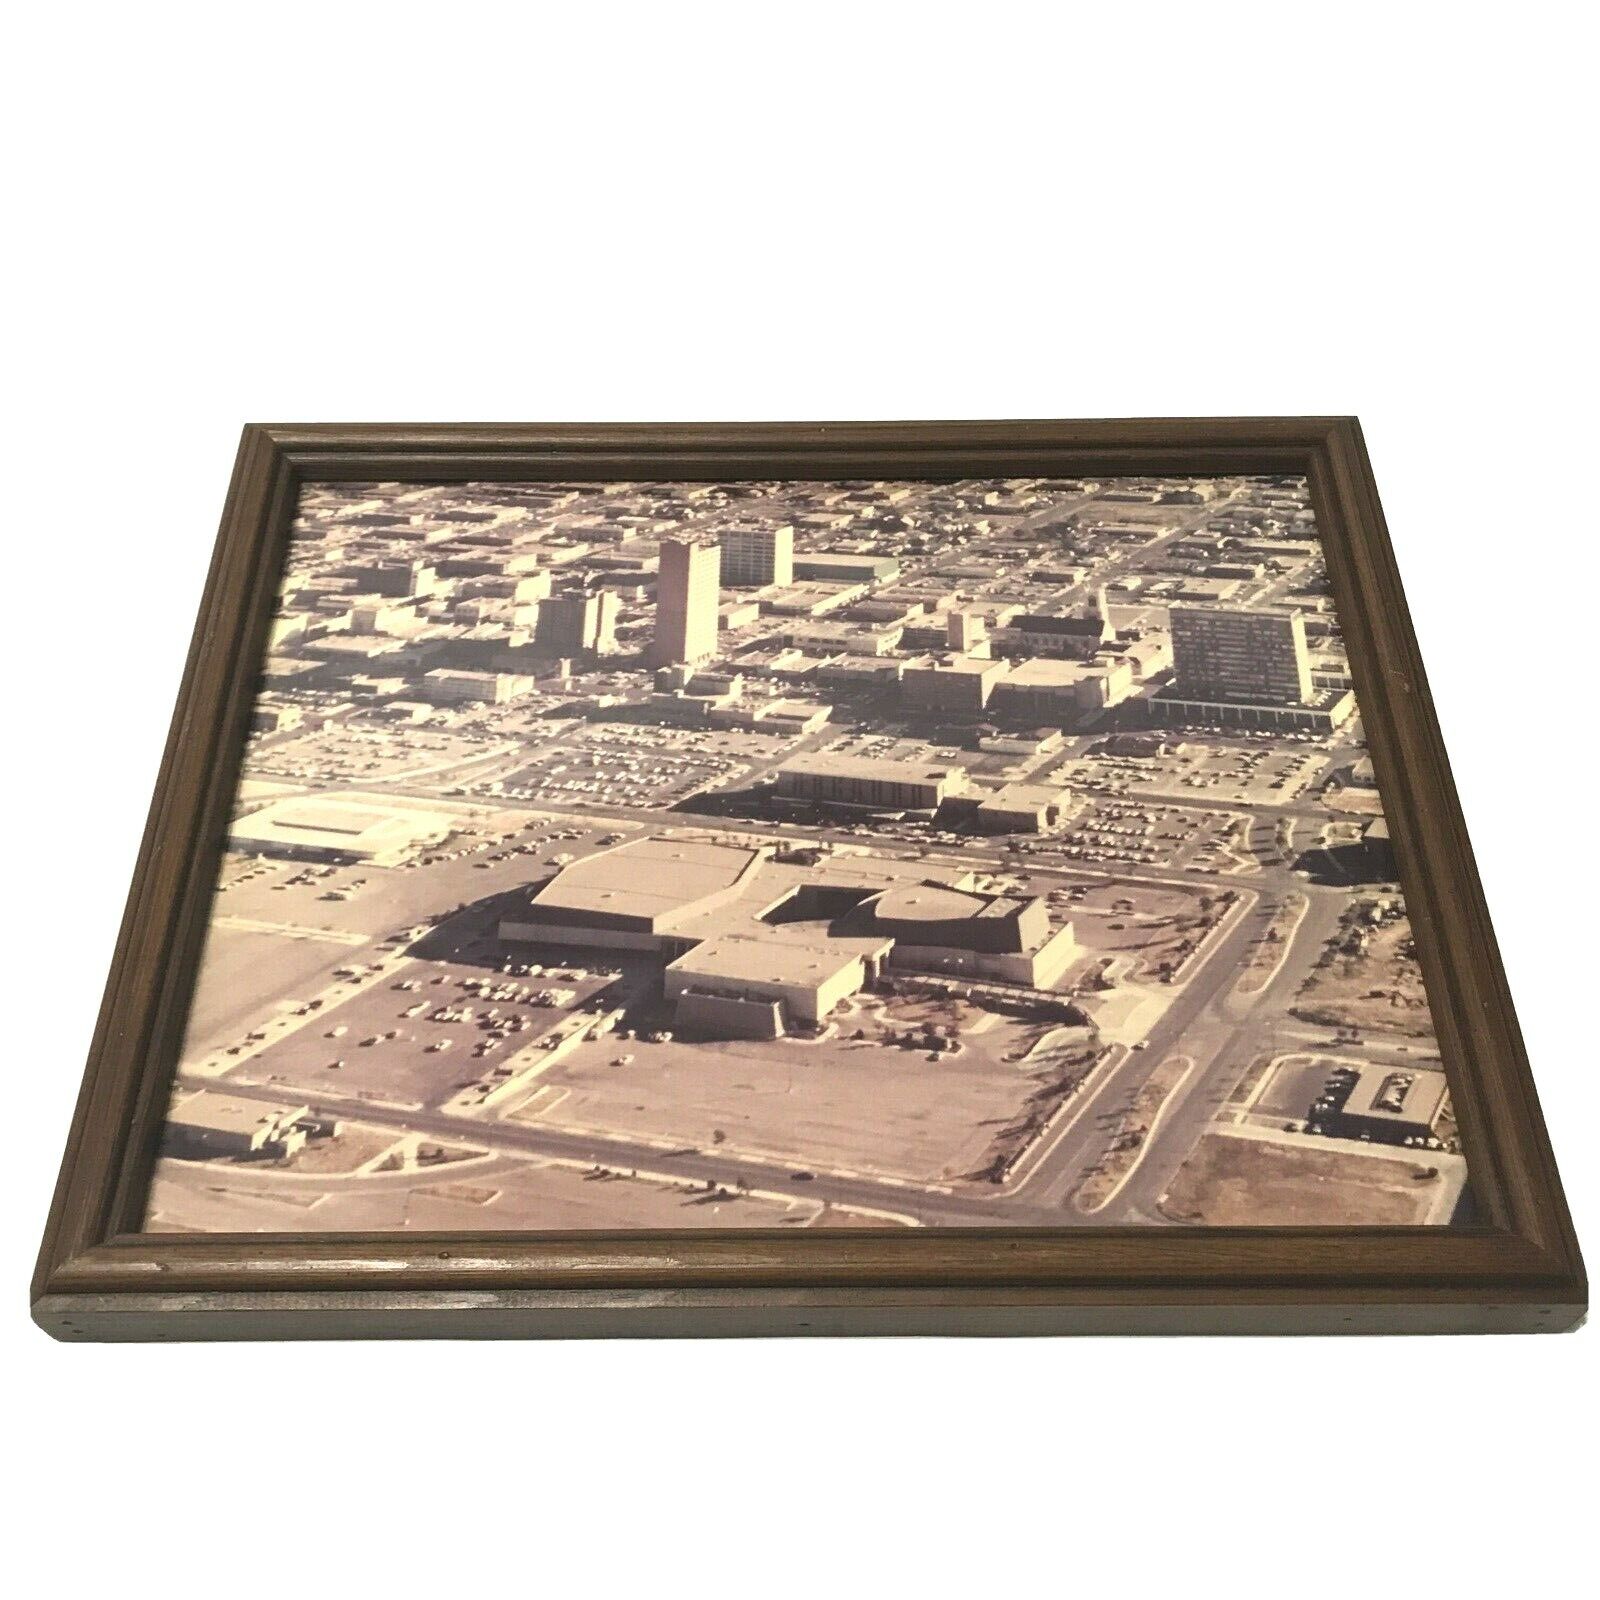 Vintage Sepia Tone Picture Downtown Lubbock Texas Framed Under Glass Early 60's